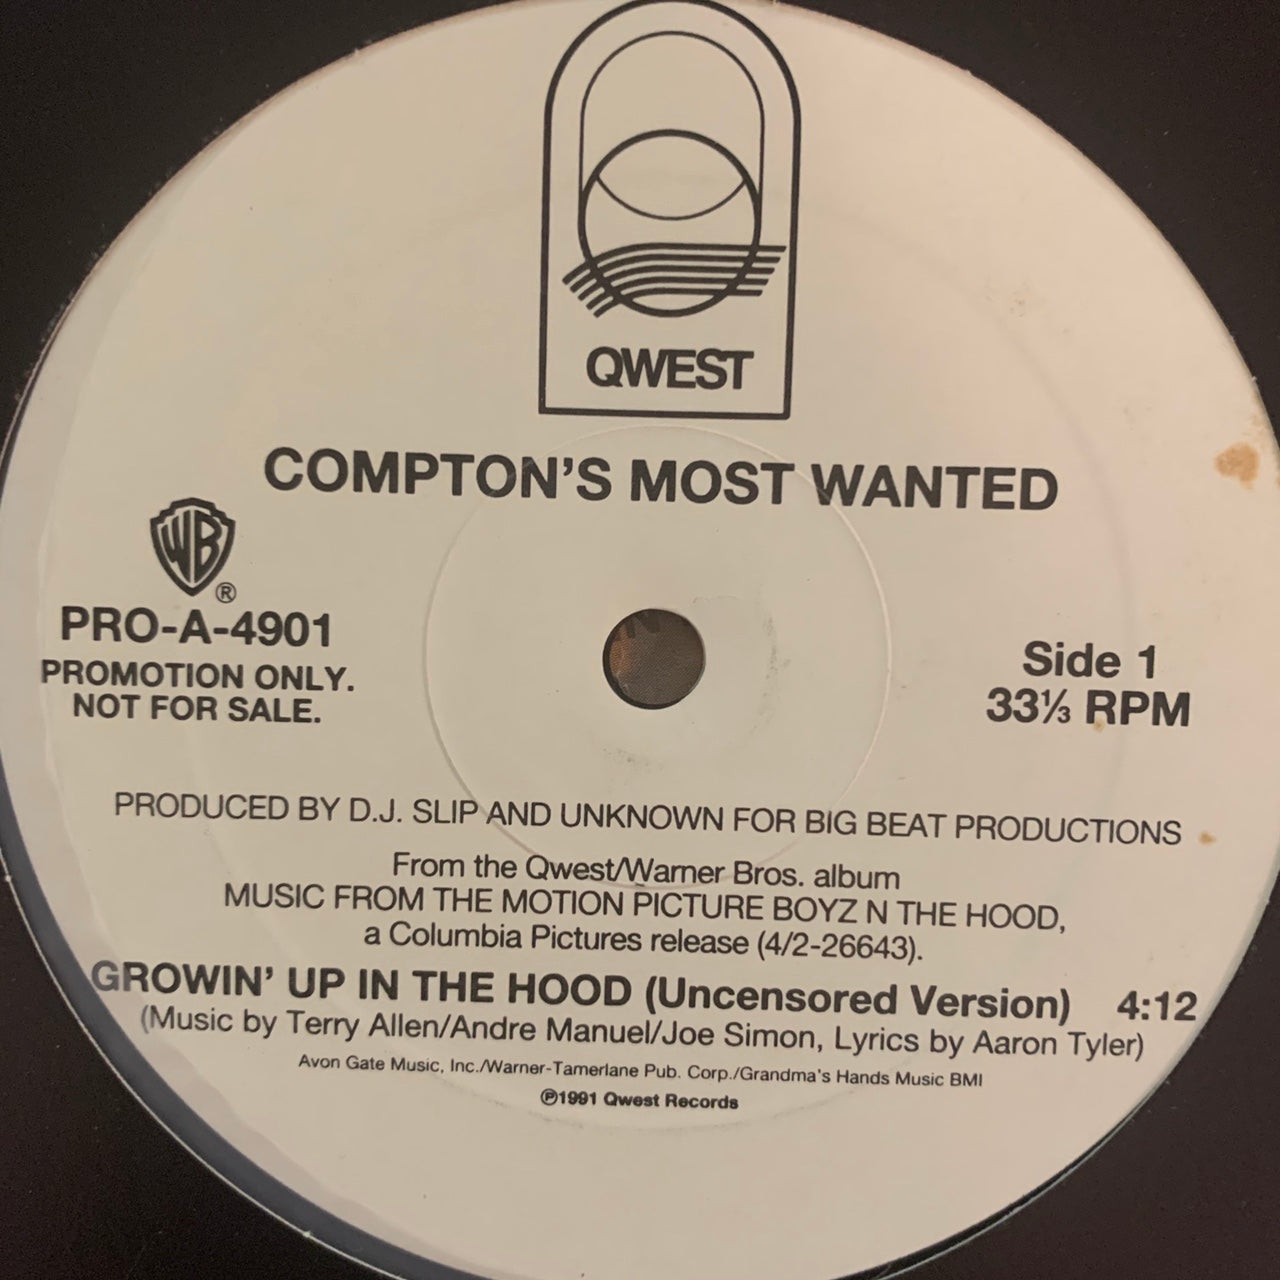 Comptons Most Wanted “Growin’ Up In The Hood” 2 Version 12inch Vinyl